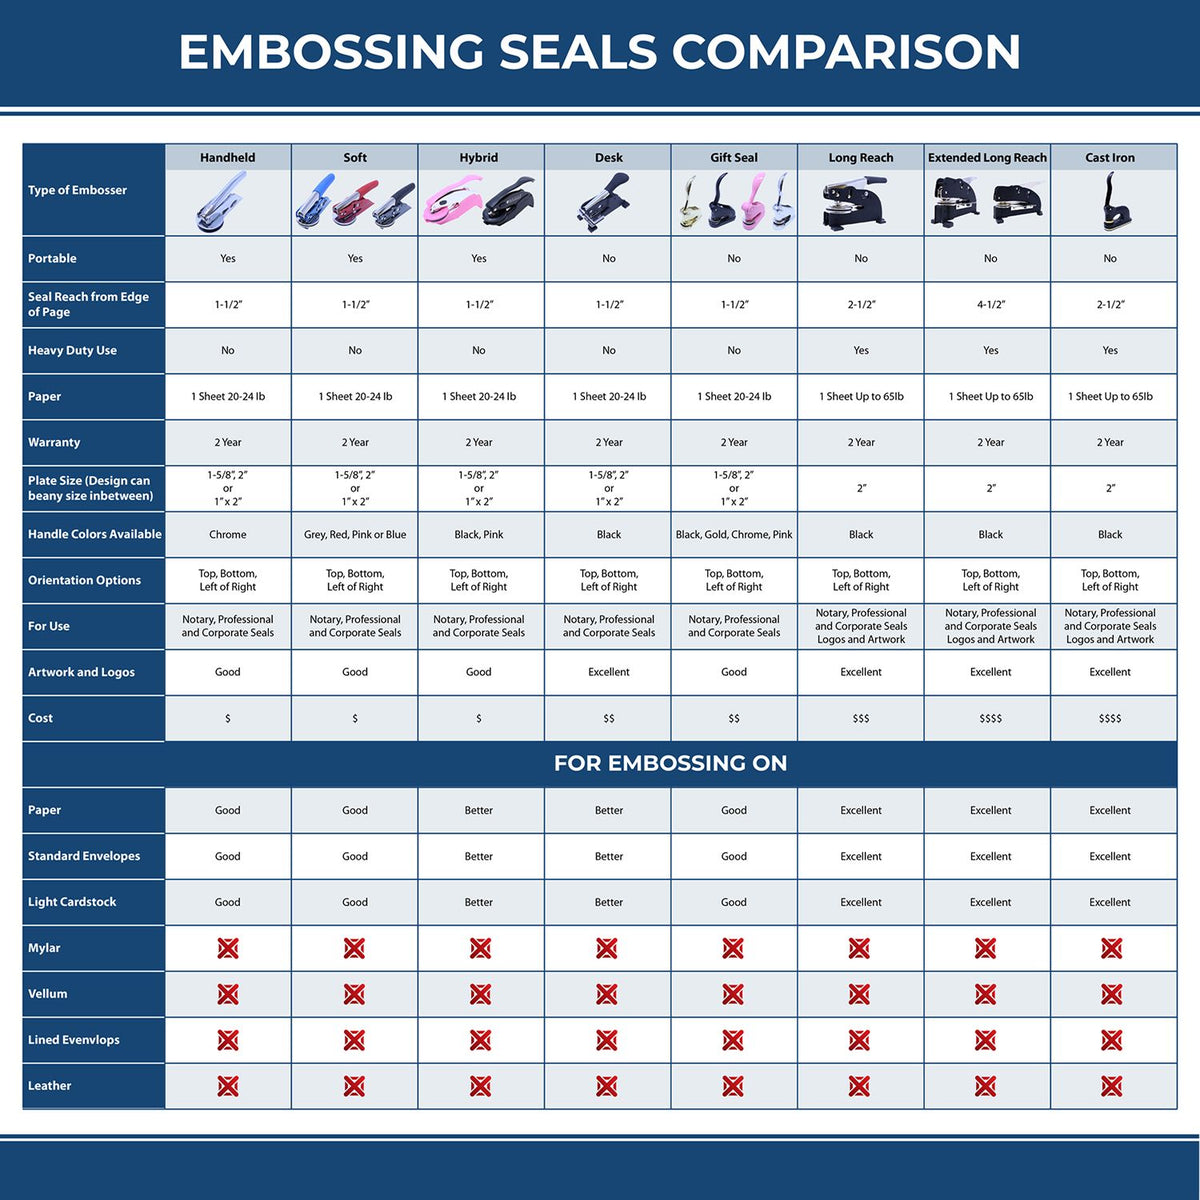 A comparison chart for the different types of mount models available for the Long Reach Illinois PE Seal.